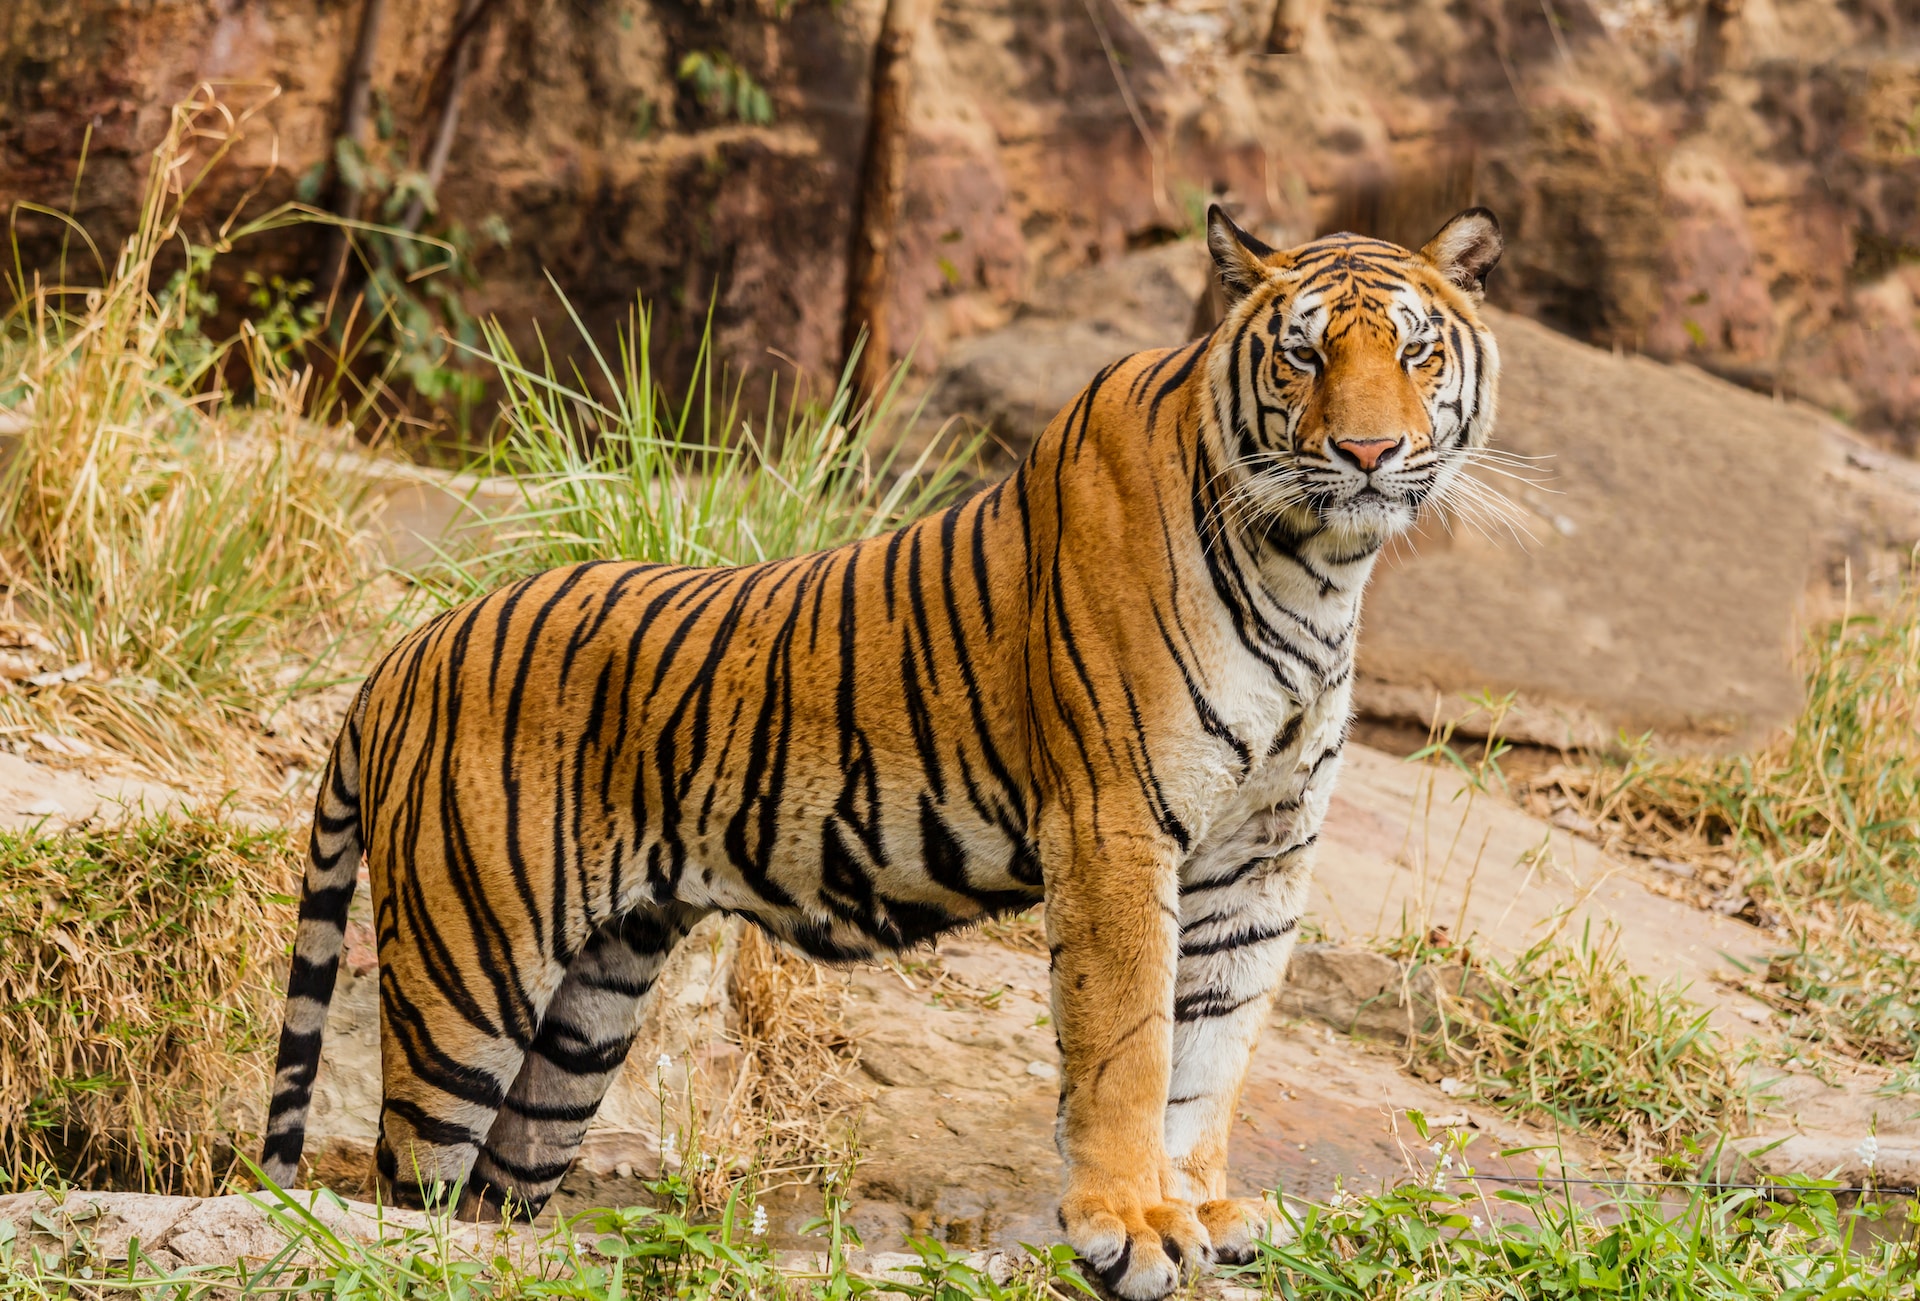 Tiger Facts For Kids, Teaching Wiki